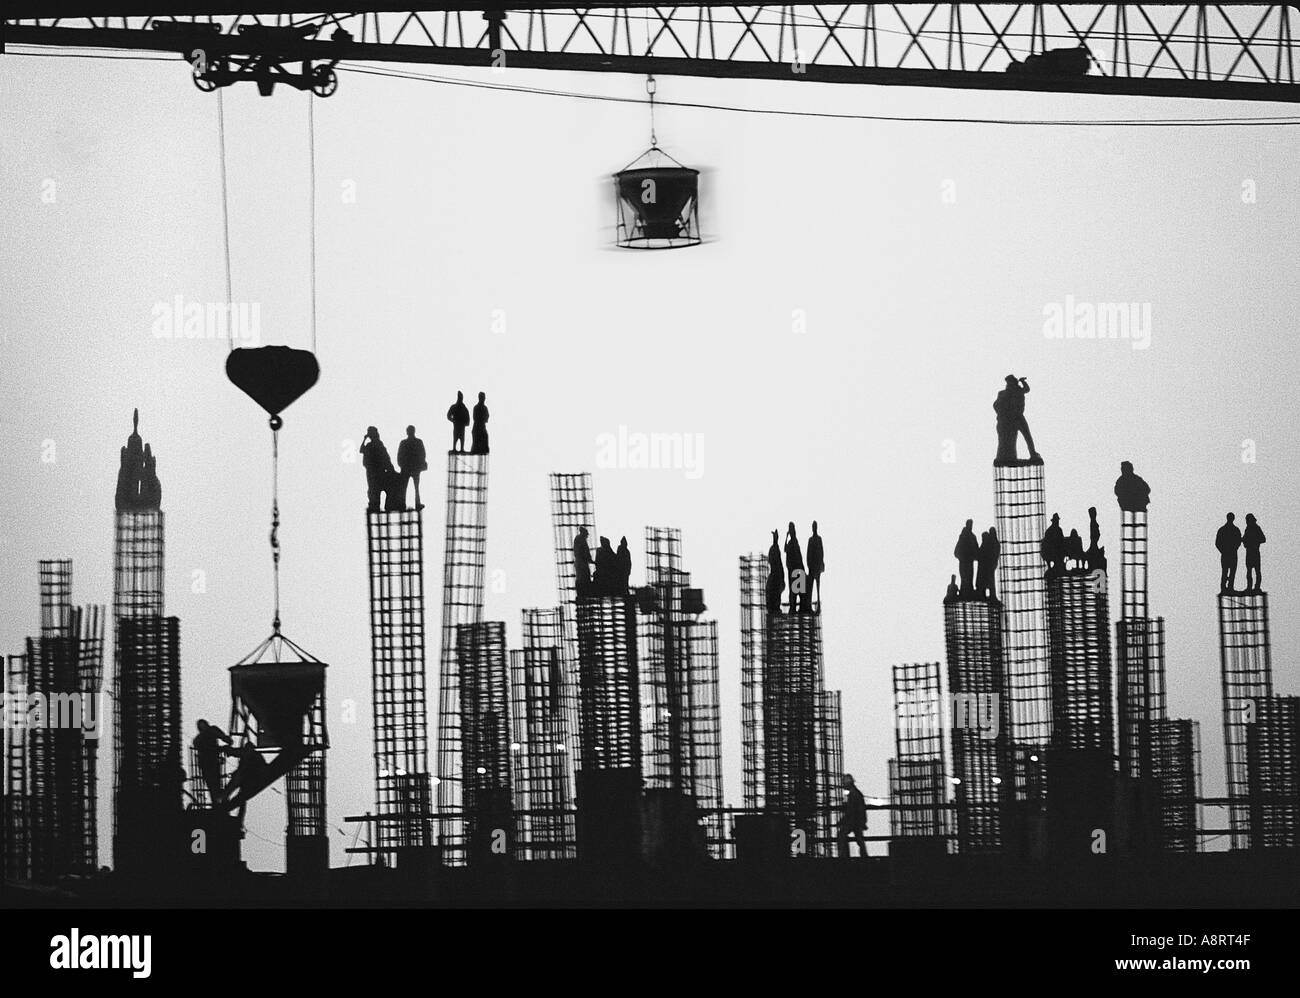 Skyscraper under construction building Black and White Stock Photos ...